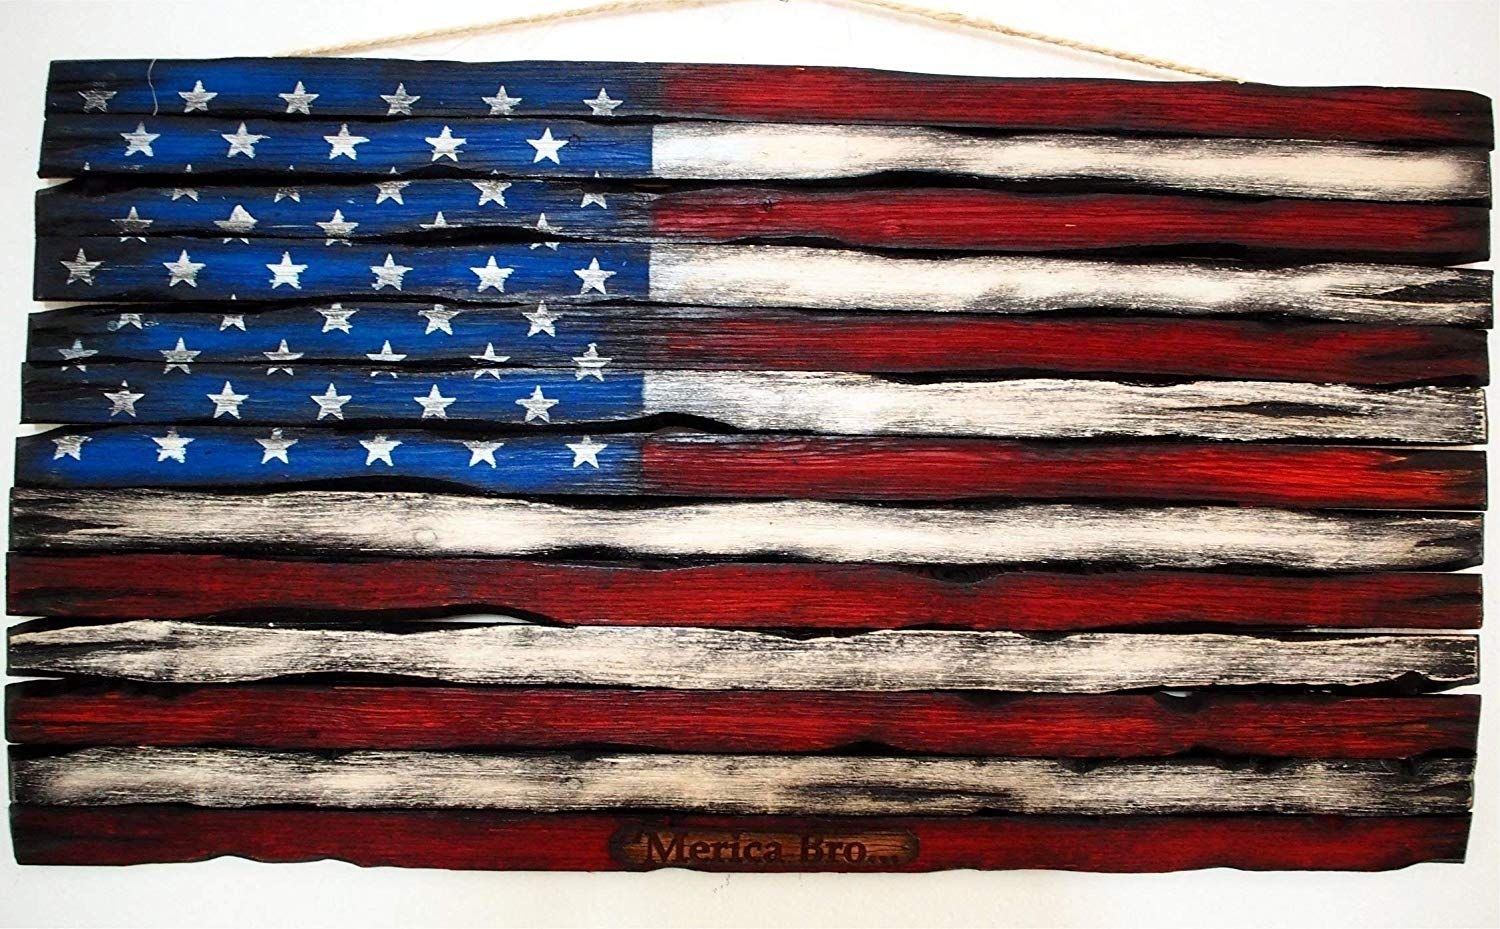 Amazon: Wooden American Flag Decor Sign | Consists Of Thirteen Inside Wooden American Flag Wall Art (View 13 of 20)